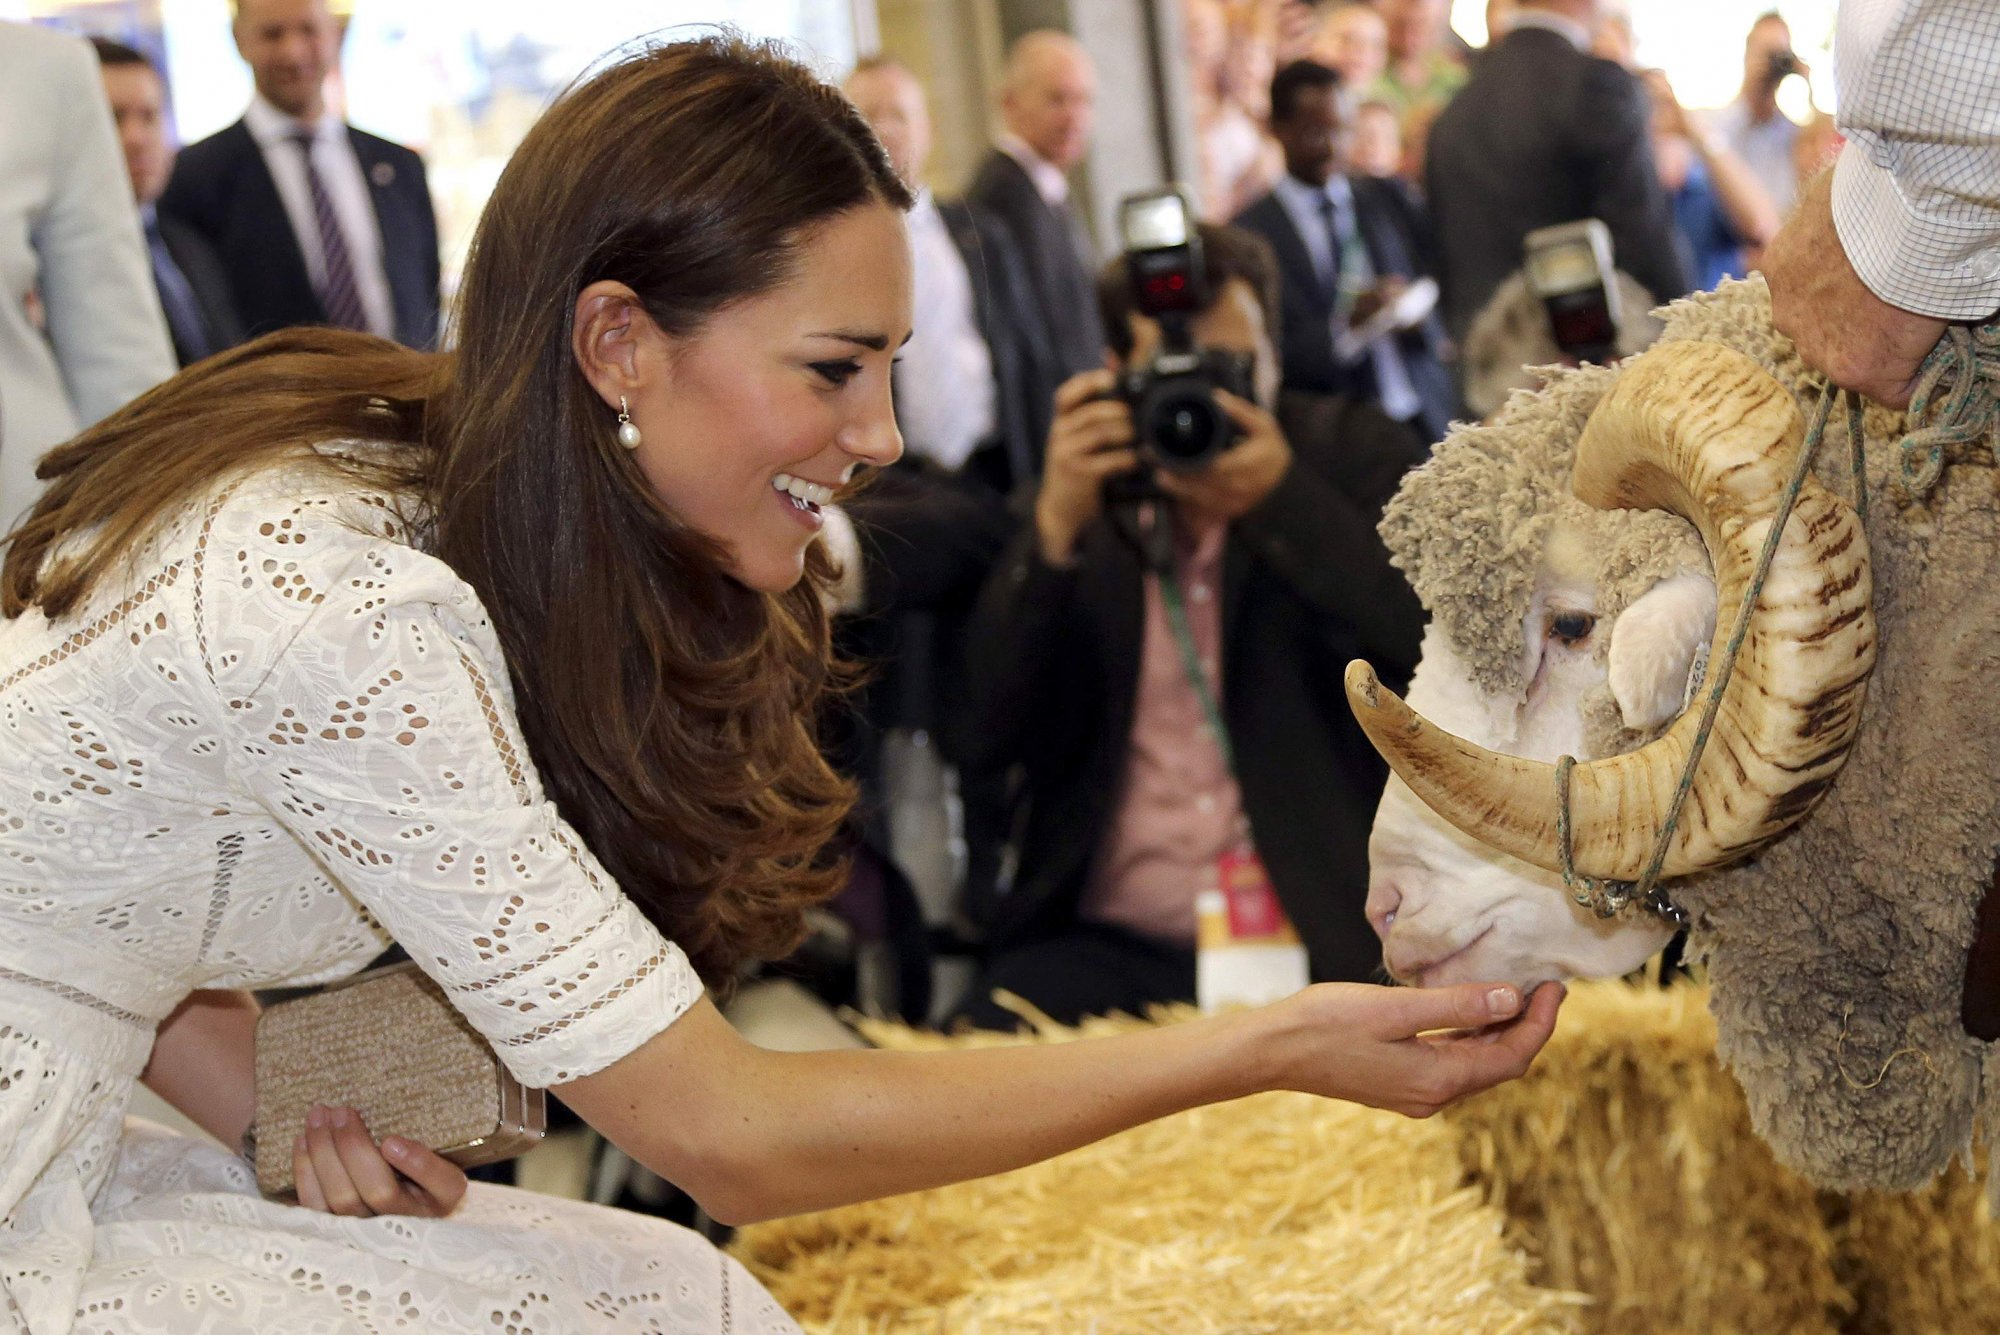 BBC responds to Kate Middleton's allegations: “Exaggerated and insensitive”